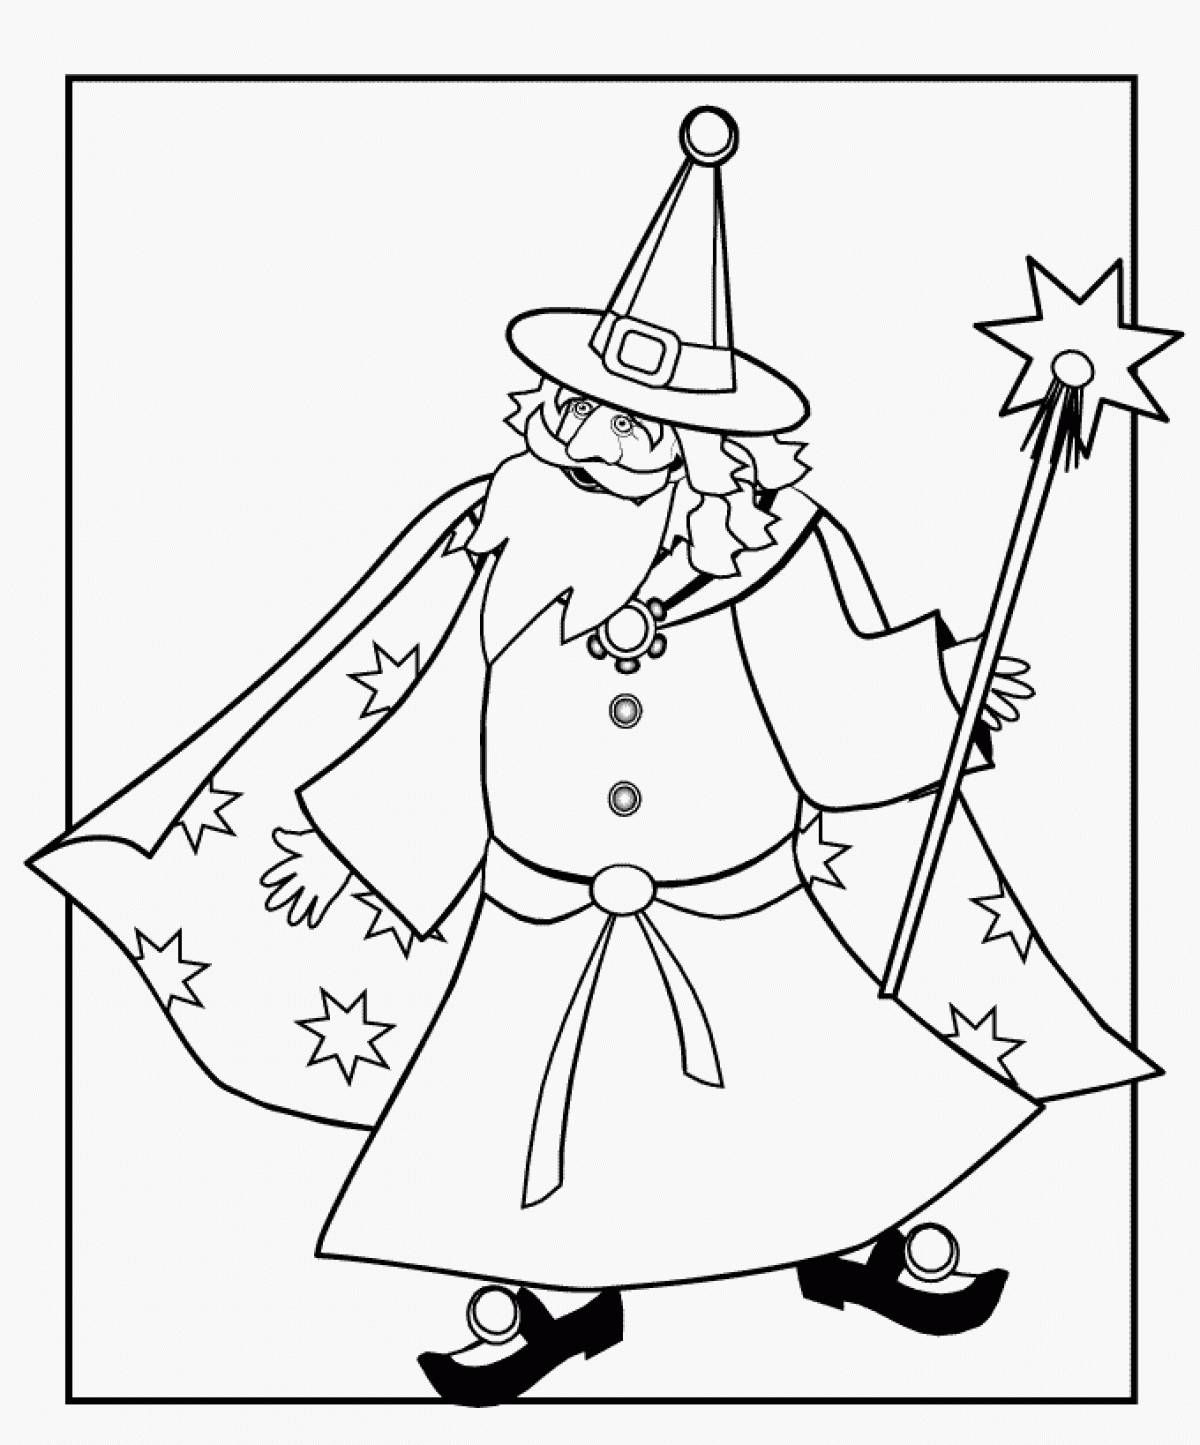 Wizard in a cloak with stars